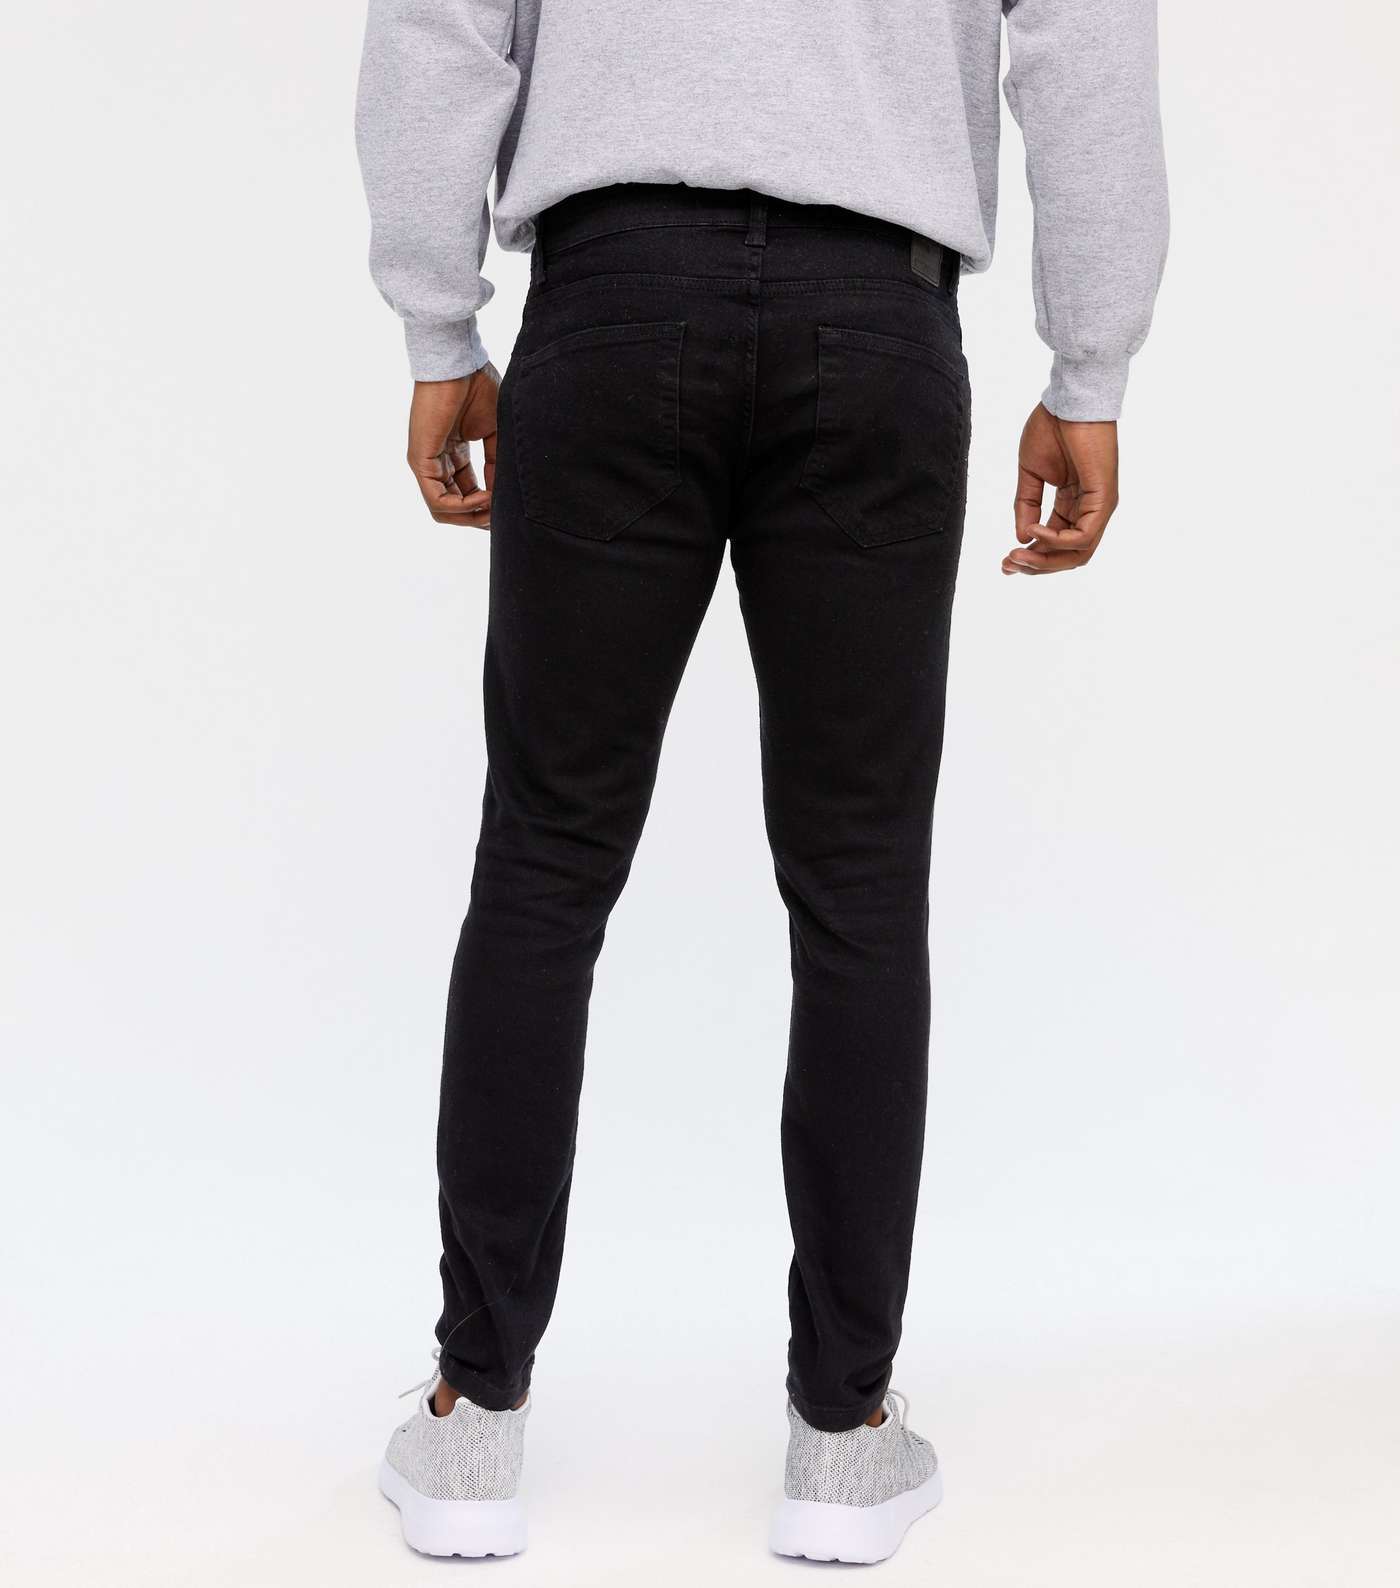 Only & Sons Black Ripped Slim Leg Jeans Image 4